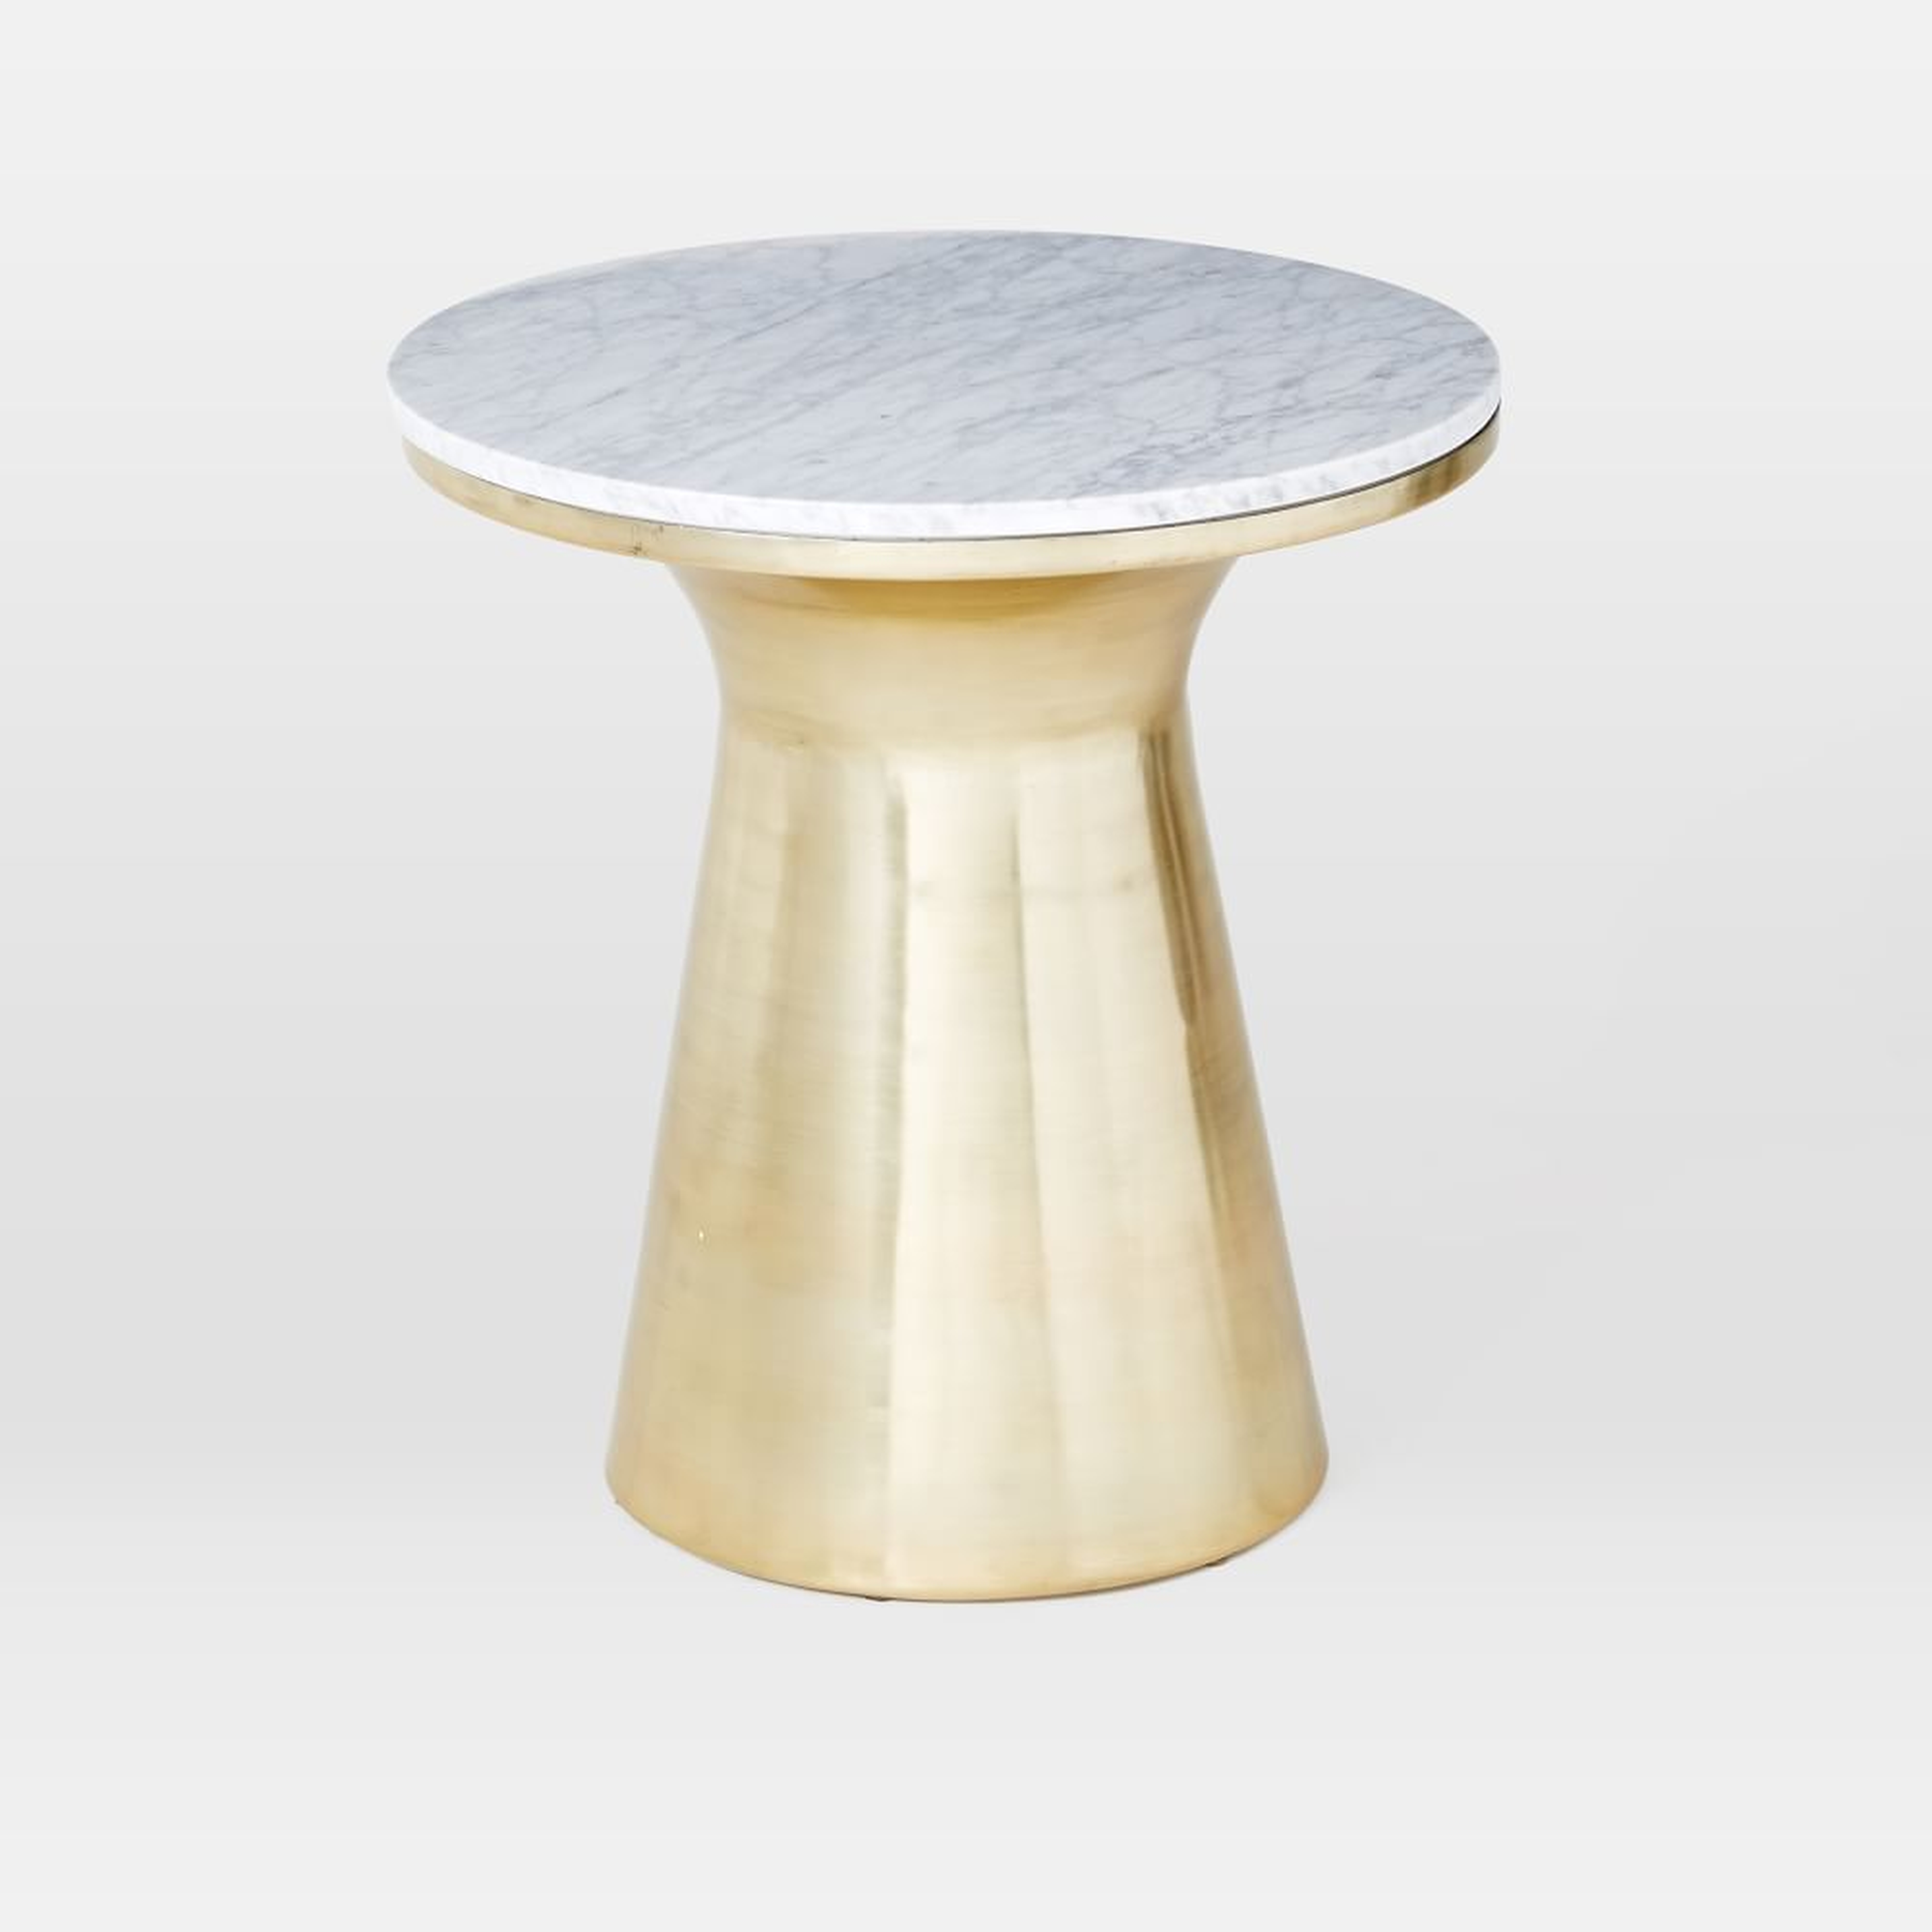 Marble Topped Pedestal Side Table, (20" Diam.), Marble/Antique Brass - West Elm